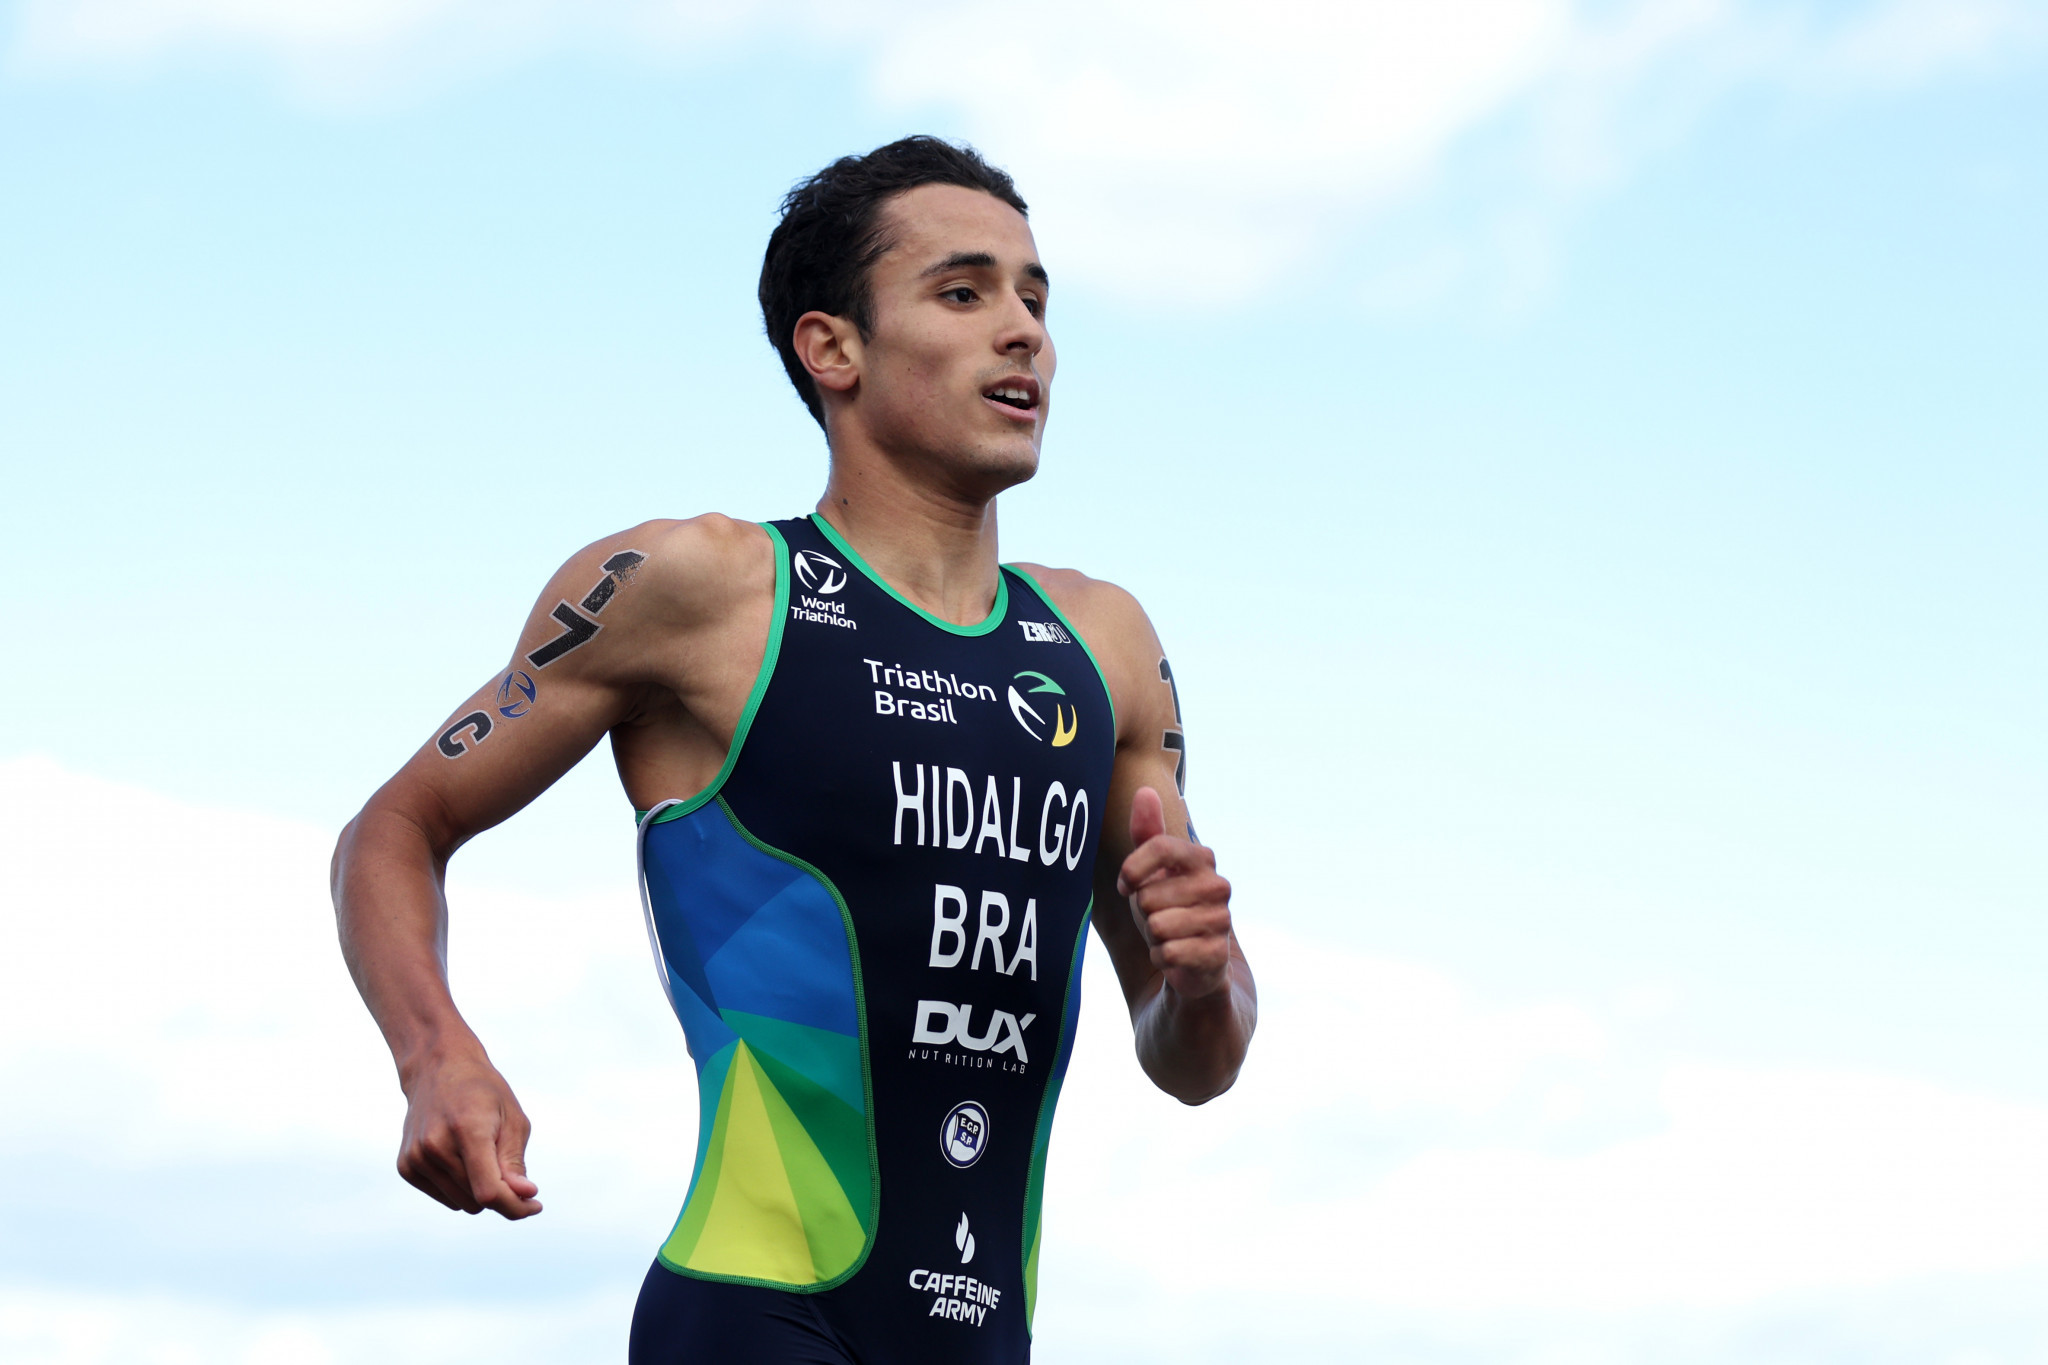 Betto snatches World Triathlon Cup win late on before Hidalgo dominates for gold